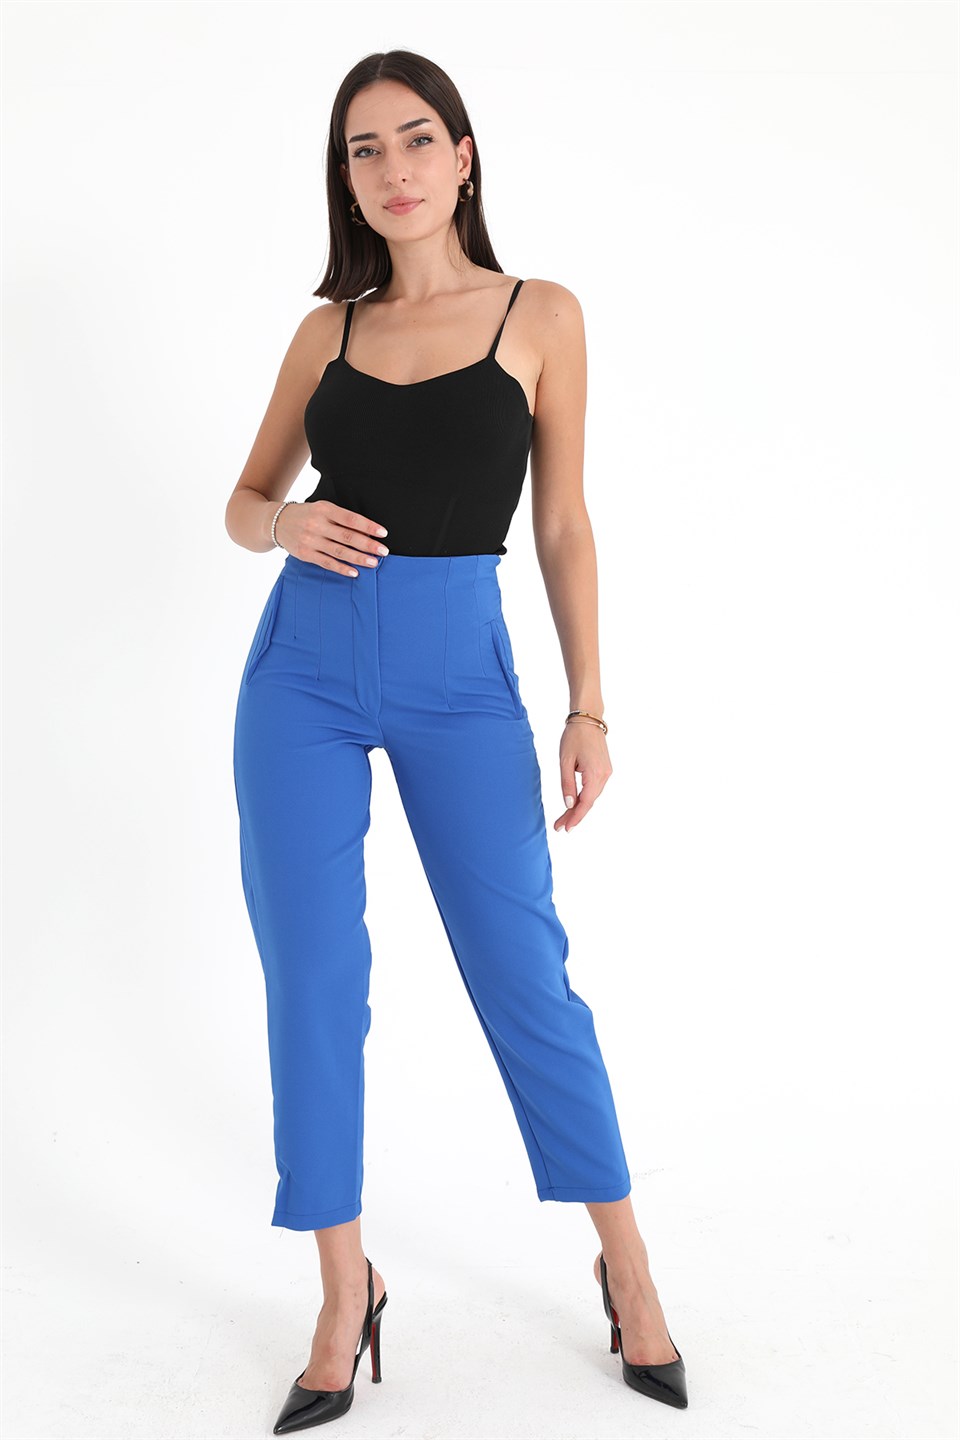 Women's High Waist Stretched Atlas Fabric Trousers - Sax Blue - STREETMODE ™